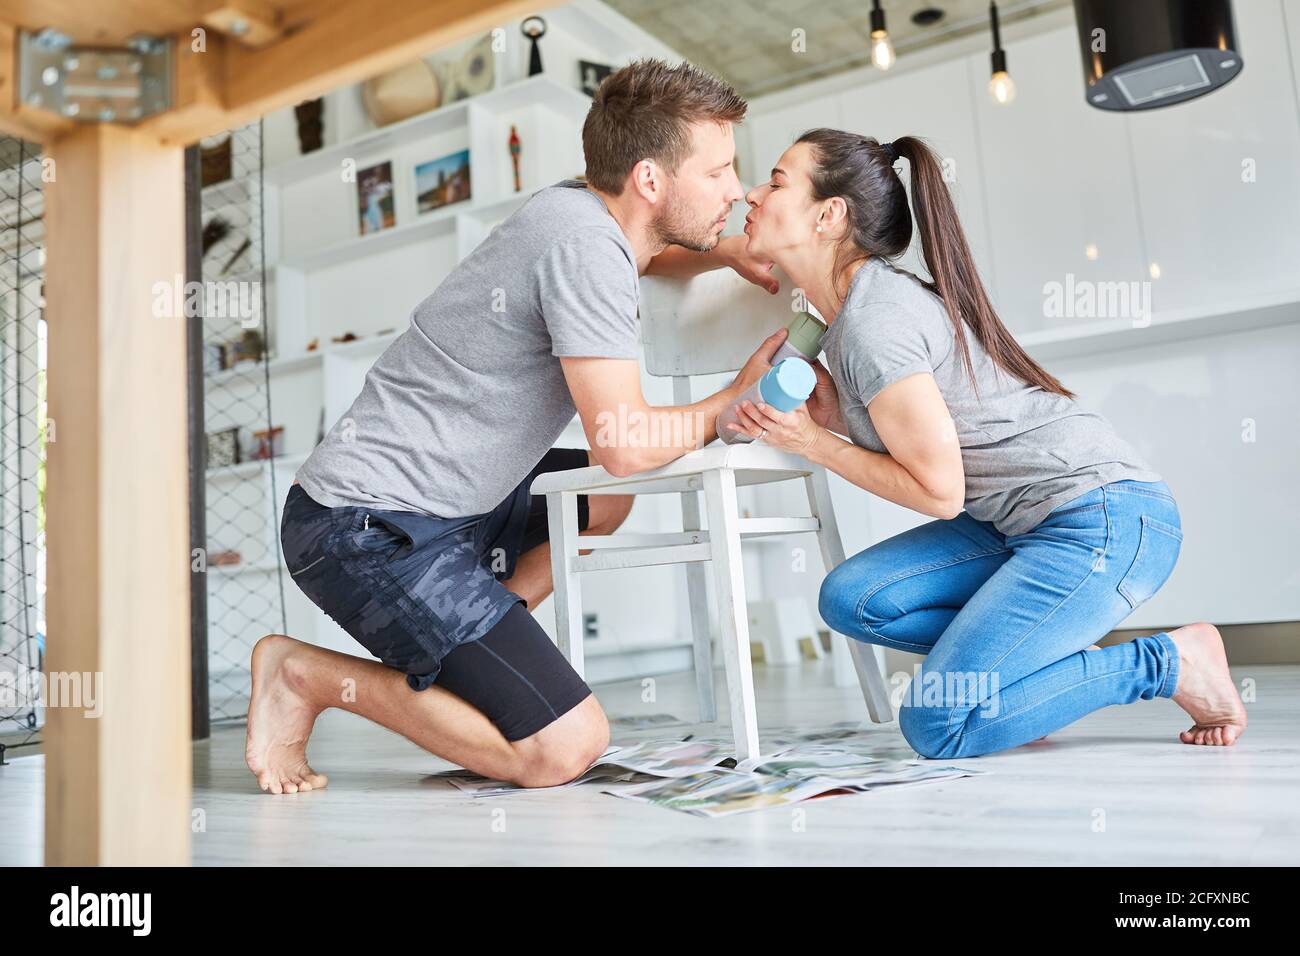 Young handyman couple kissing while refurbishing furniture and painting chair Stock Photo